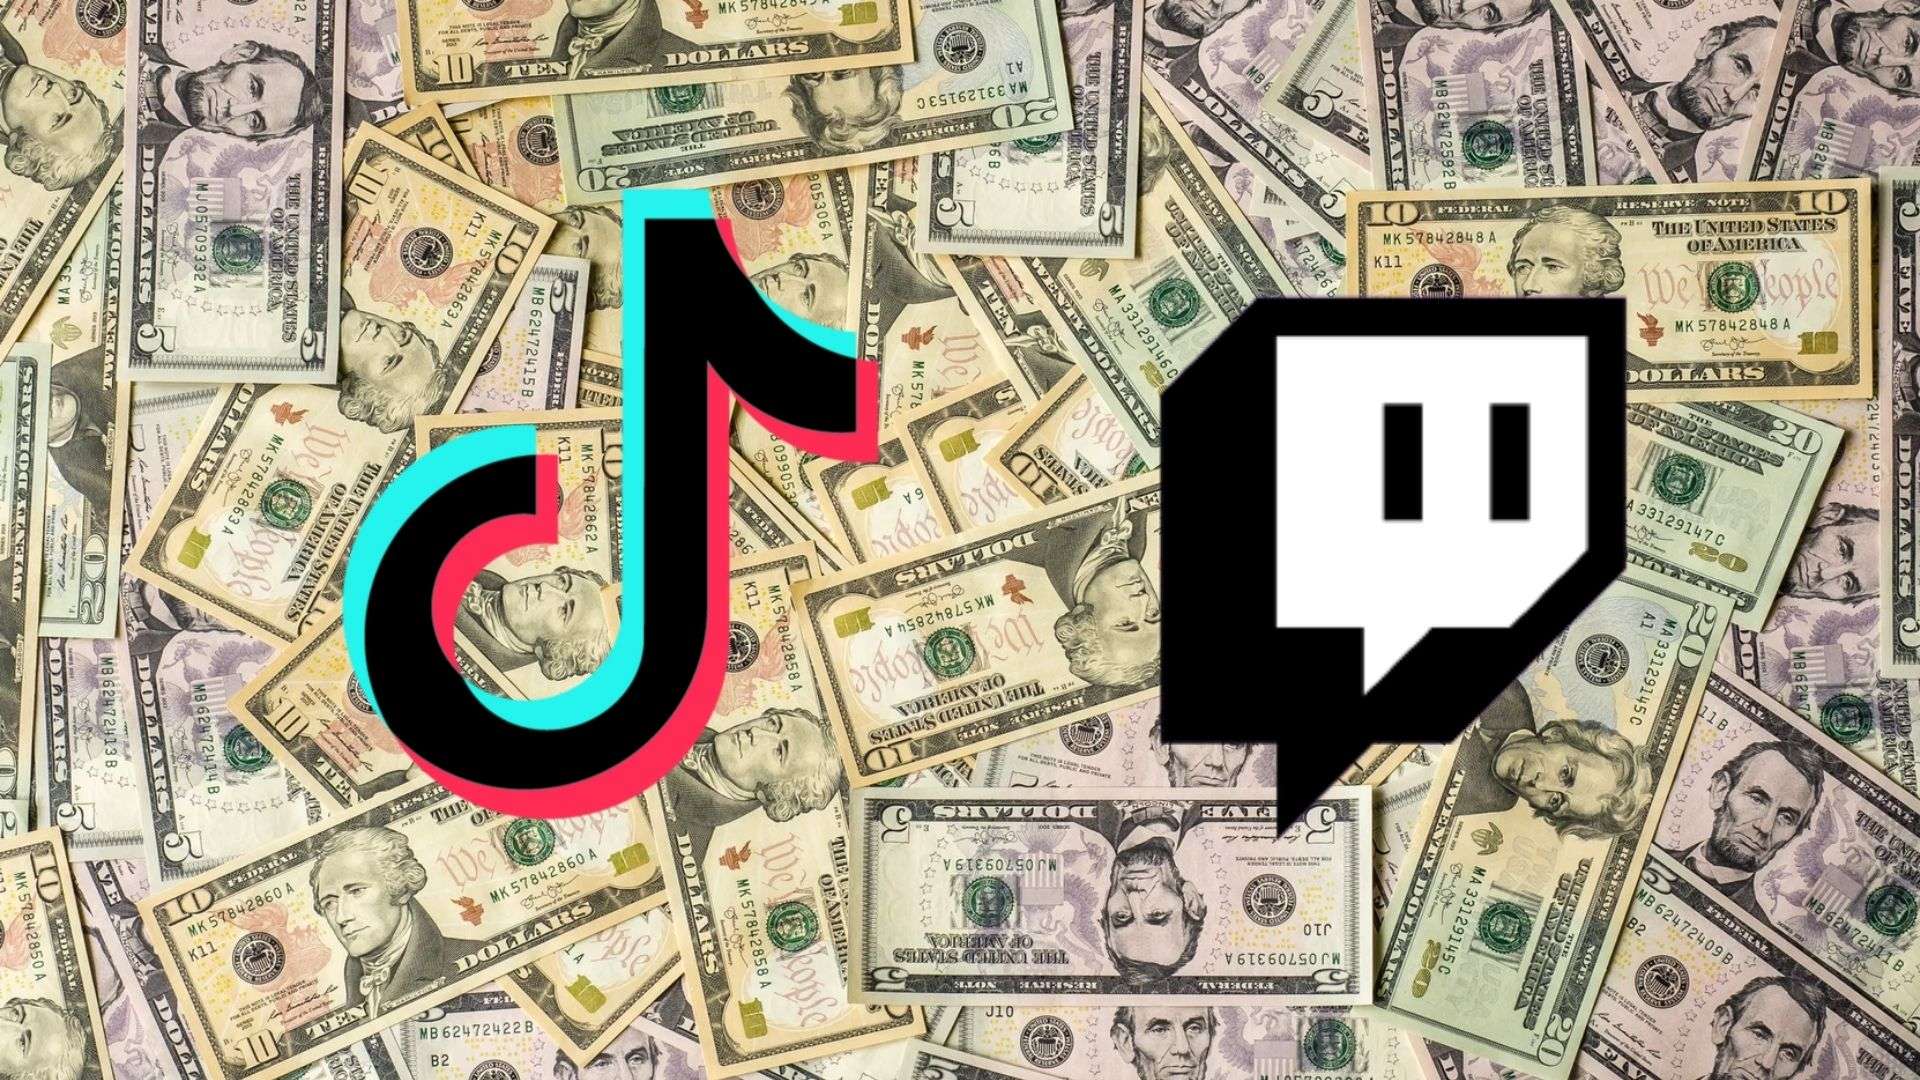 TikTOk and Twitch logos with dollars in background